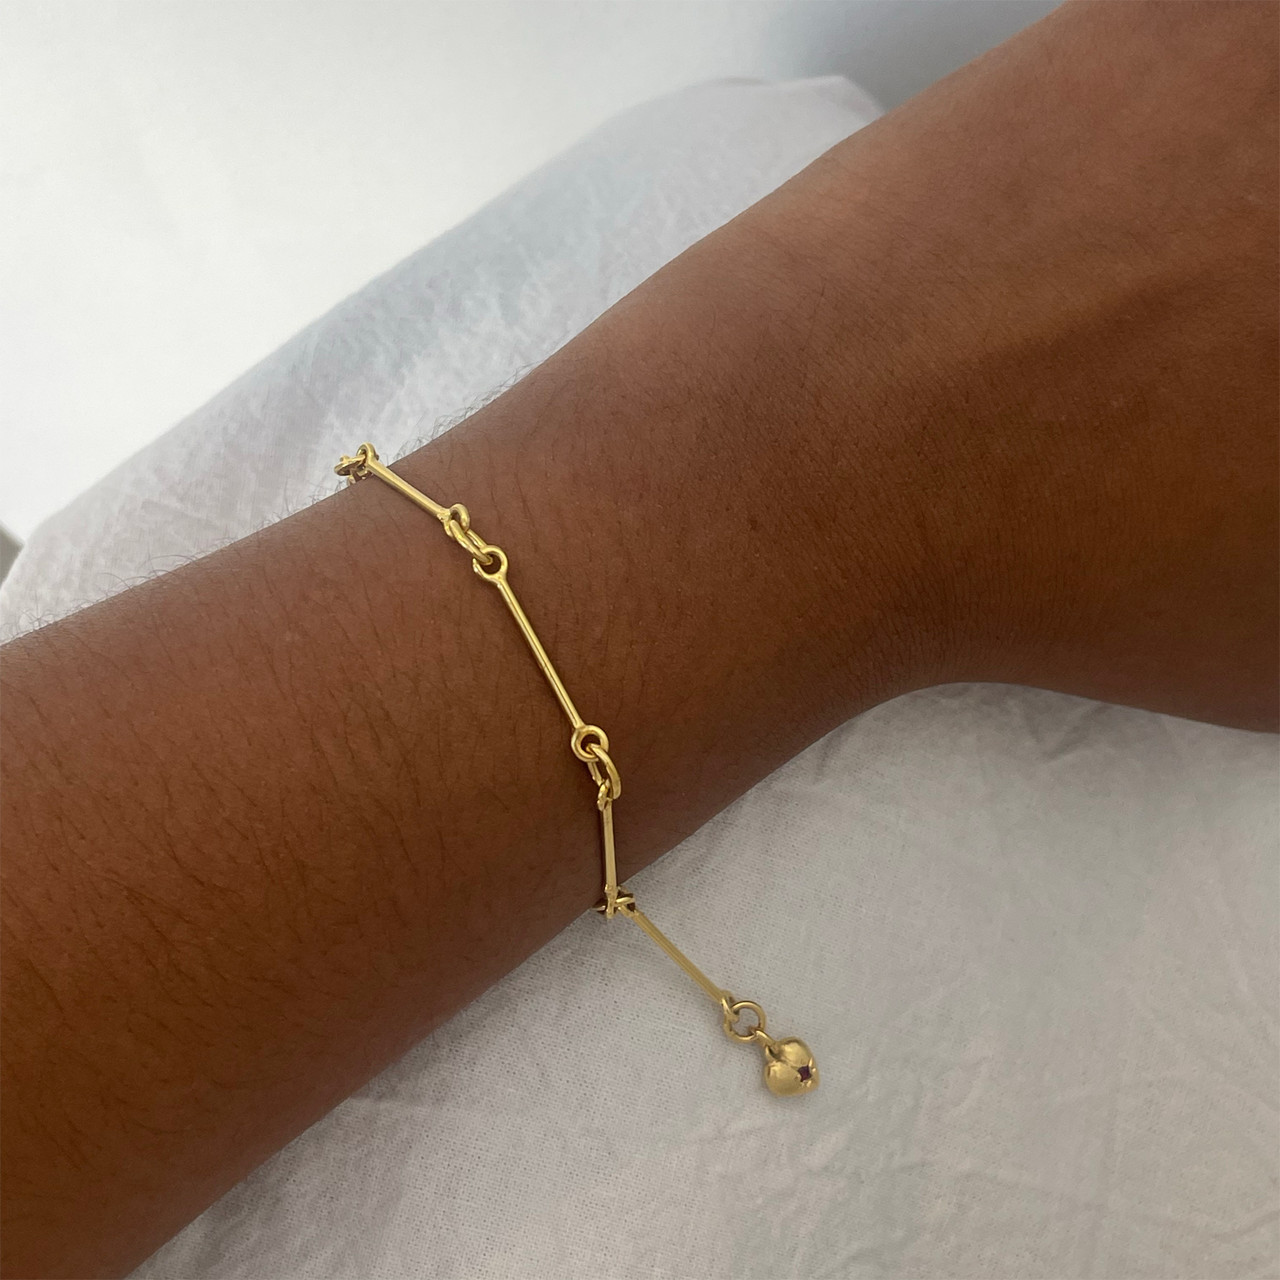 Gold Plated Amorcito Bracelet with Blue Sapphire, Maria Beltran, tomfoolery